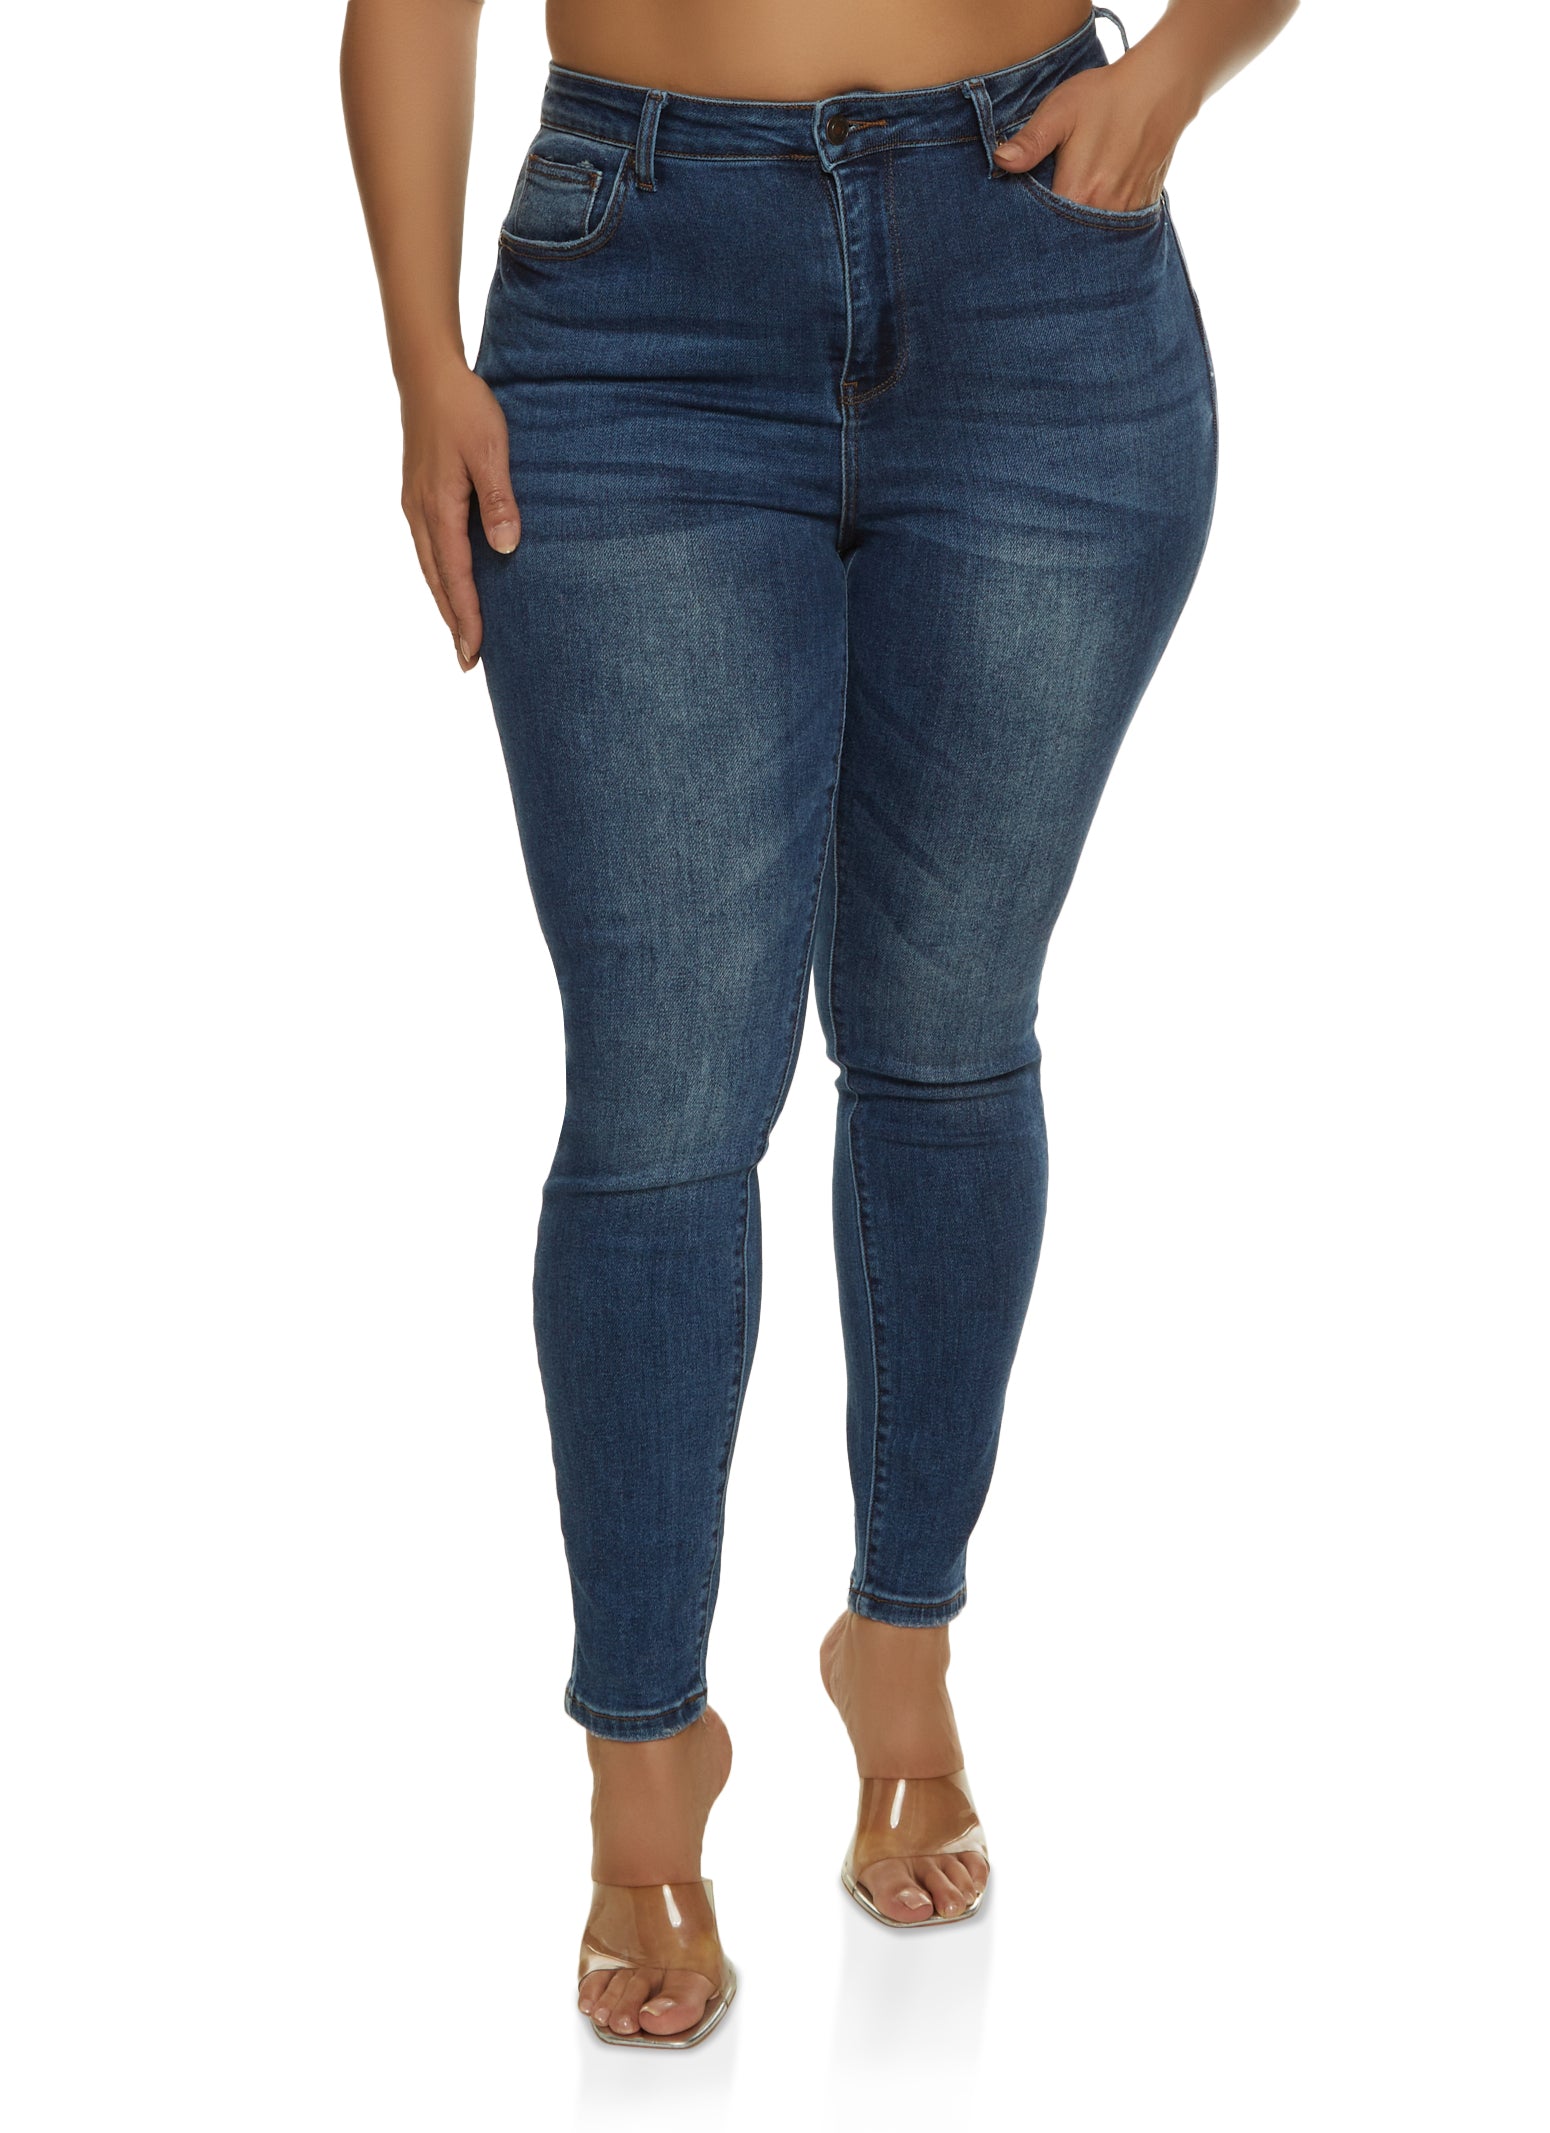 Womens Plus Size WAX Whiskered High Waisted Jeans, Blue, Size 16